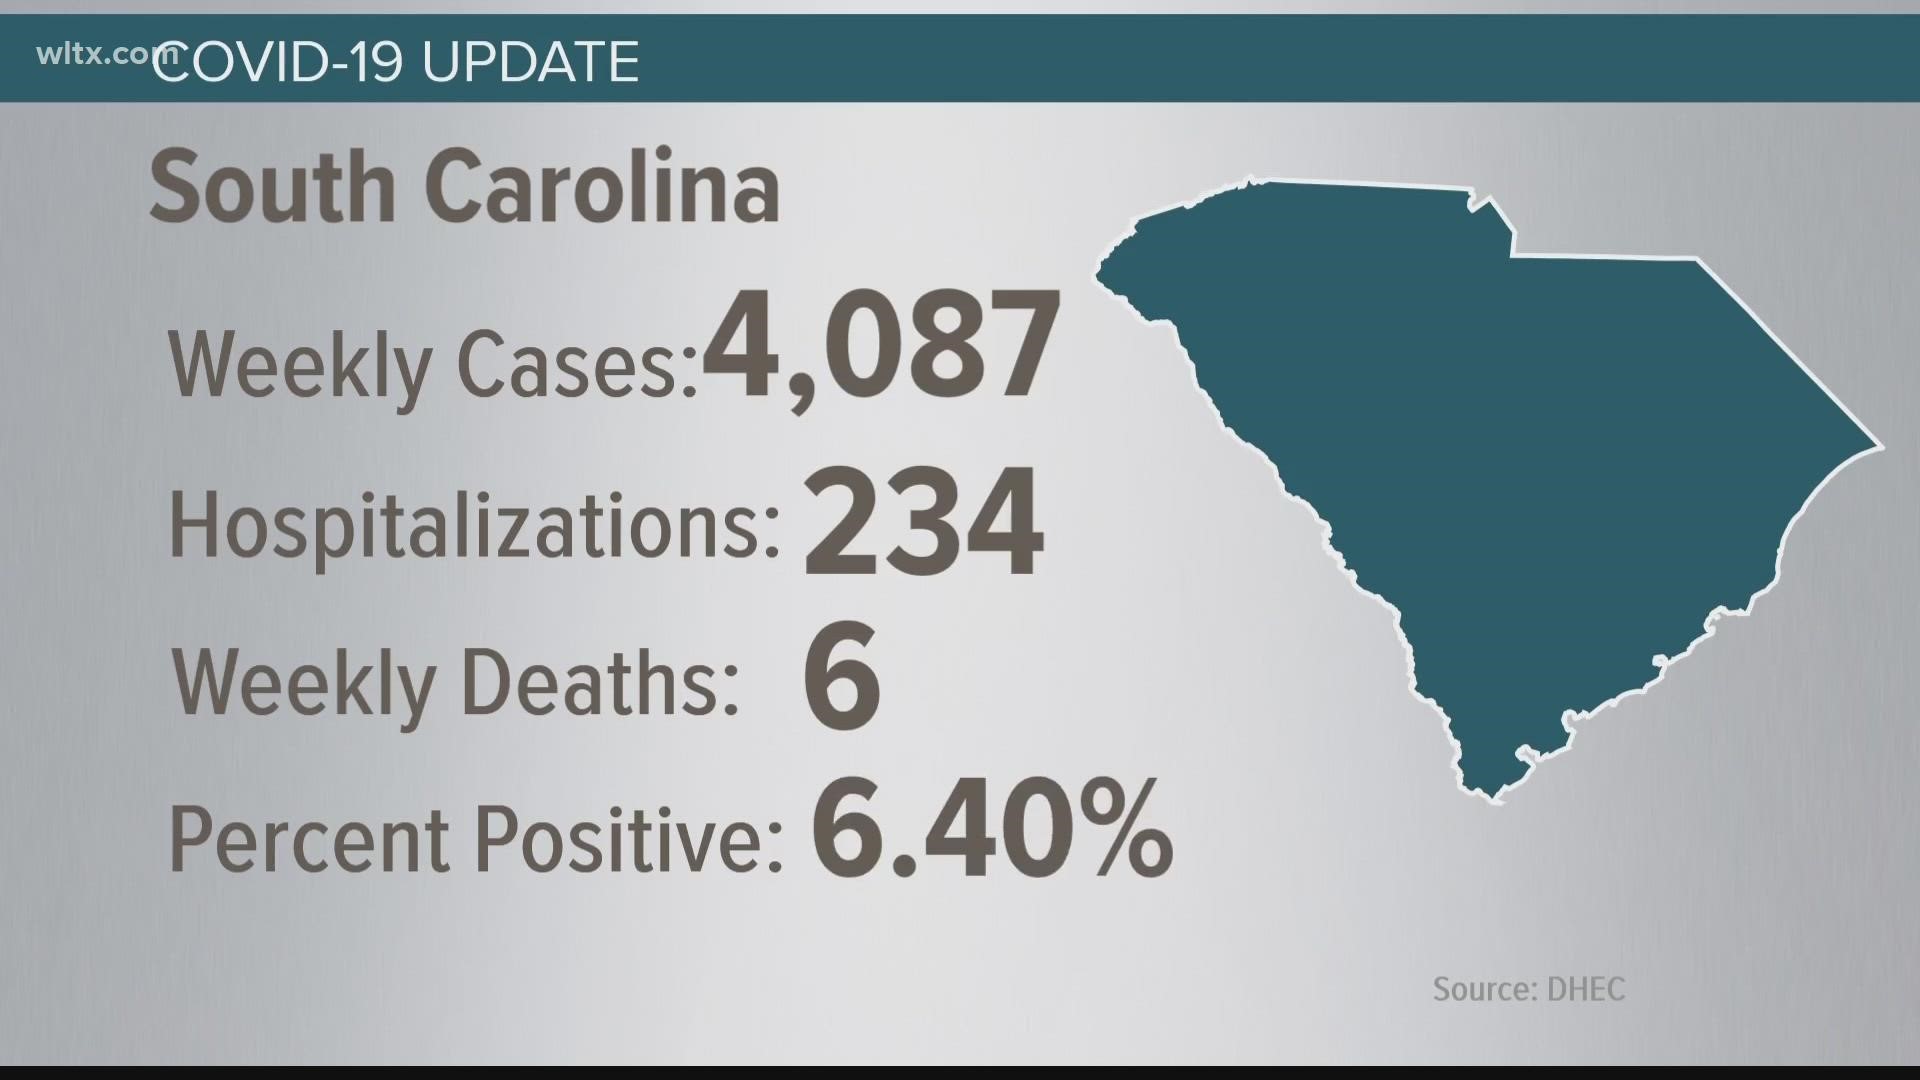 Last week the health agency said there were over 4,000 new COVID cases and 234 people hospitalized.